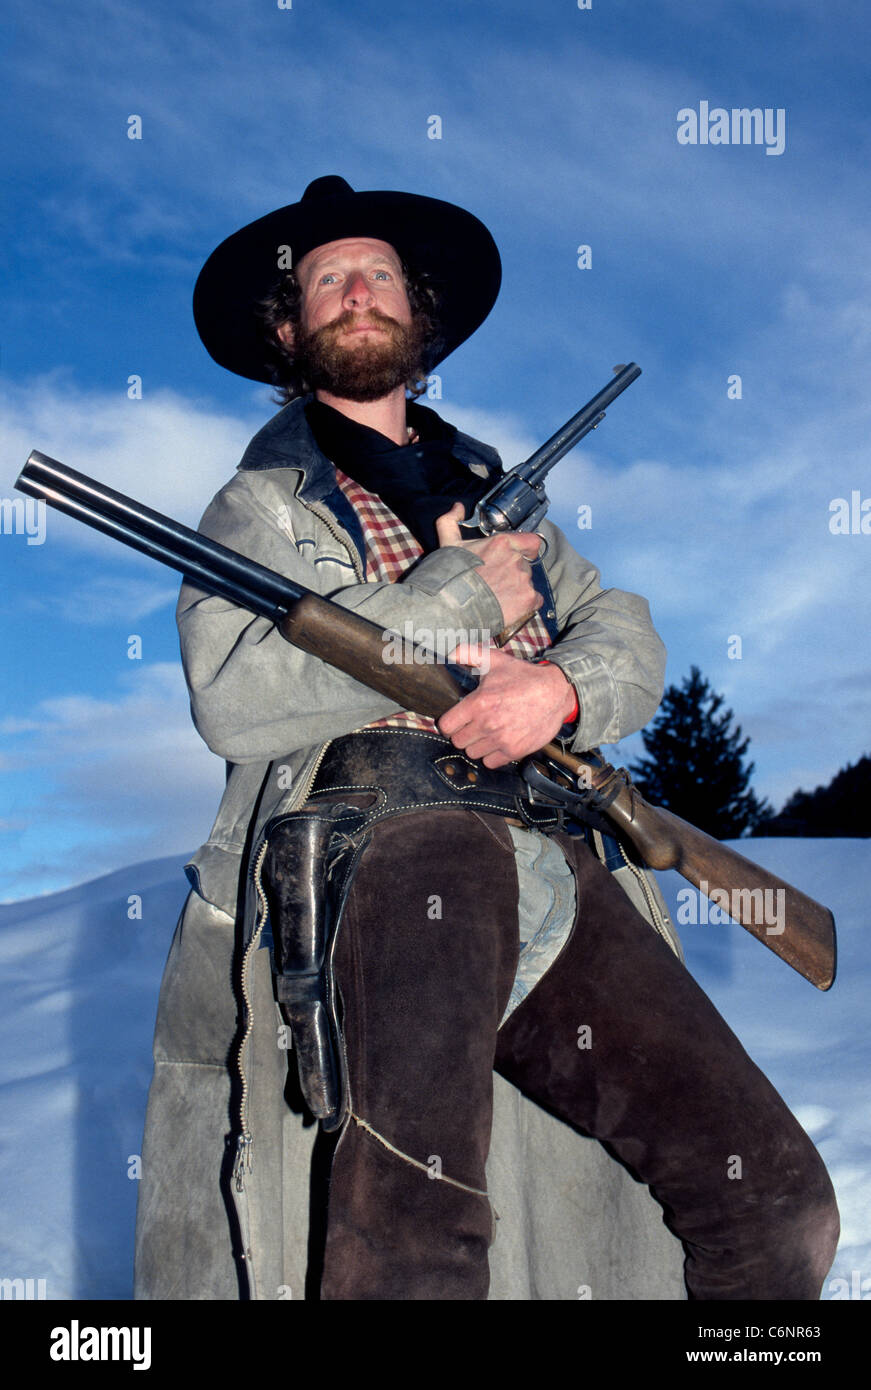 A gunslinging cowboy in the Shootout Gang brings the Old West to life with gunfight performances for tourists in Jackson Hole, Wyoming, USA. Stock Photo